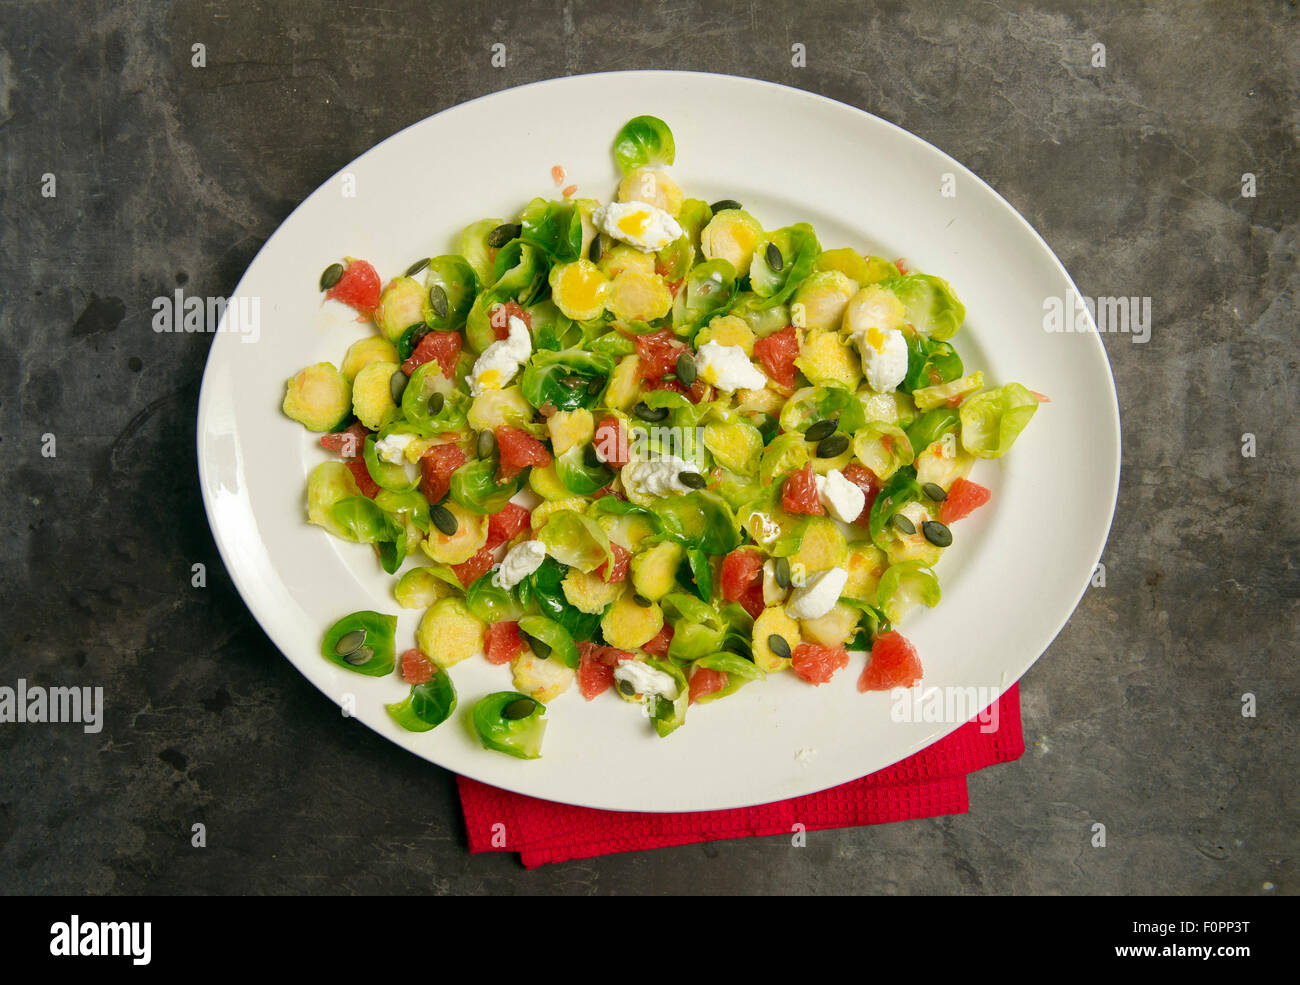 Brussels sprout salad with grapefruit and ricotta. Stock Photo